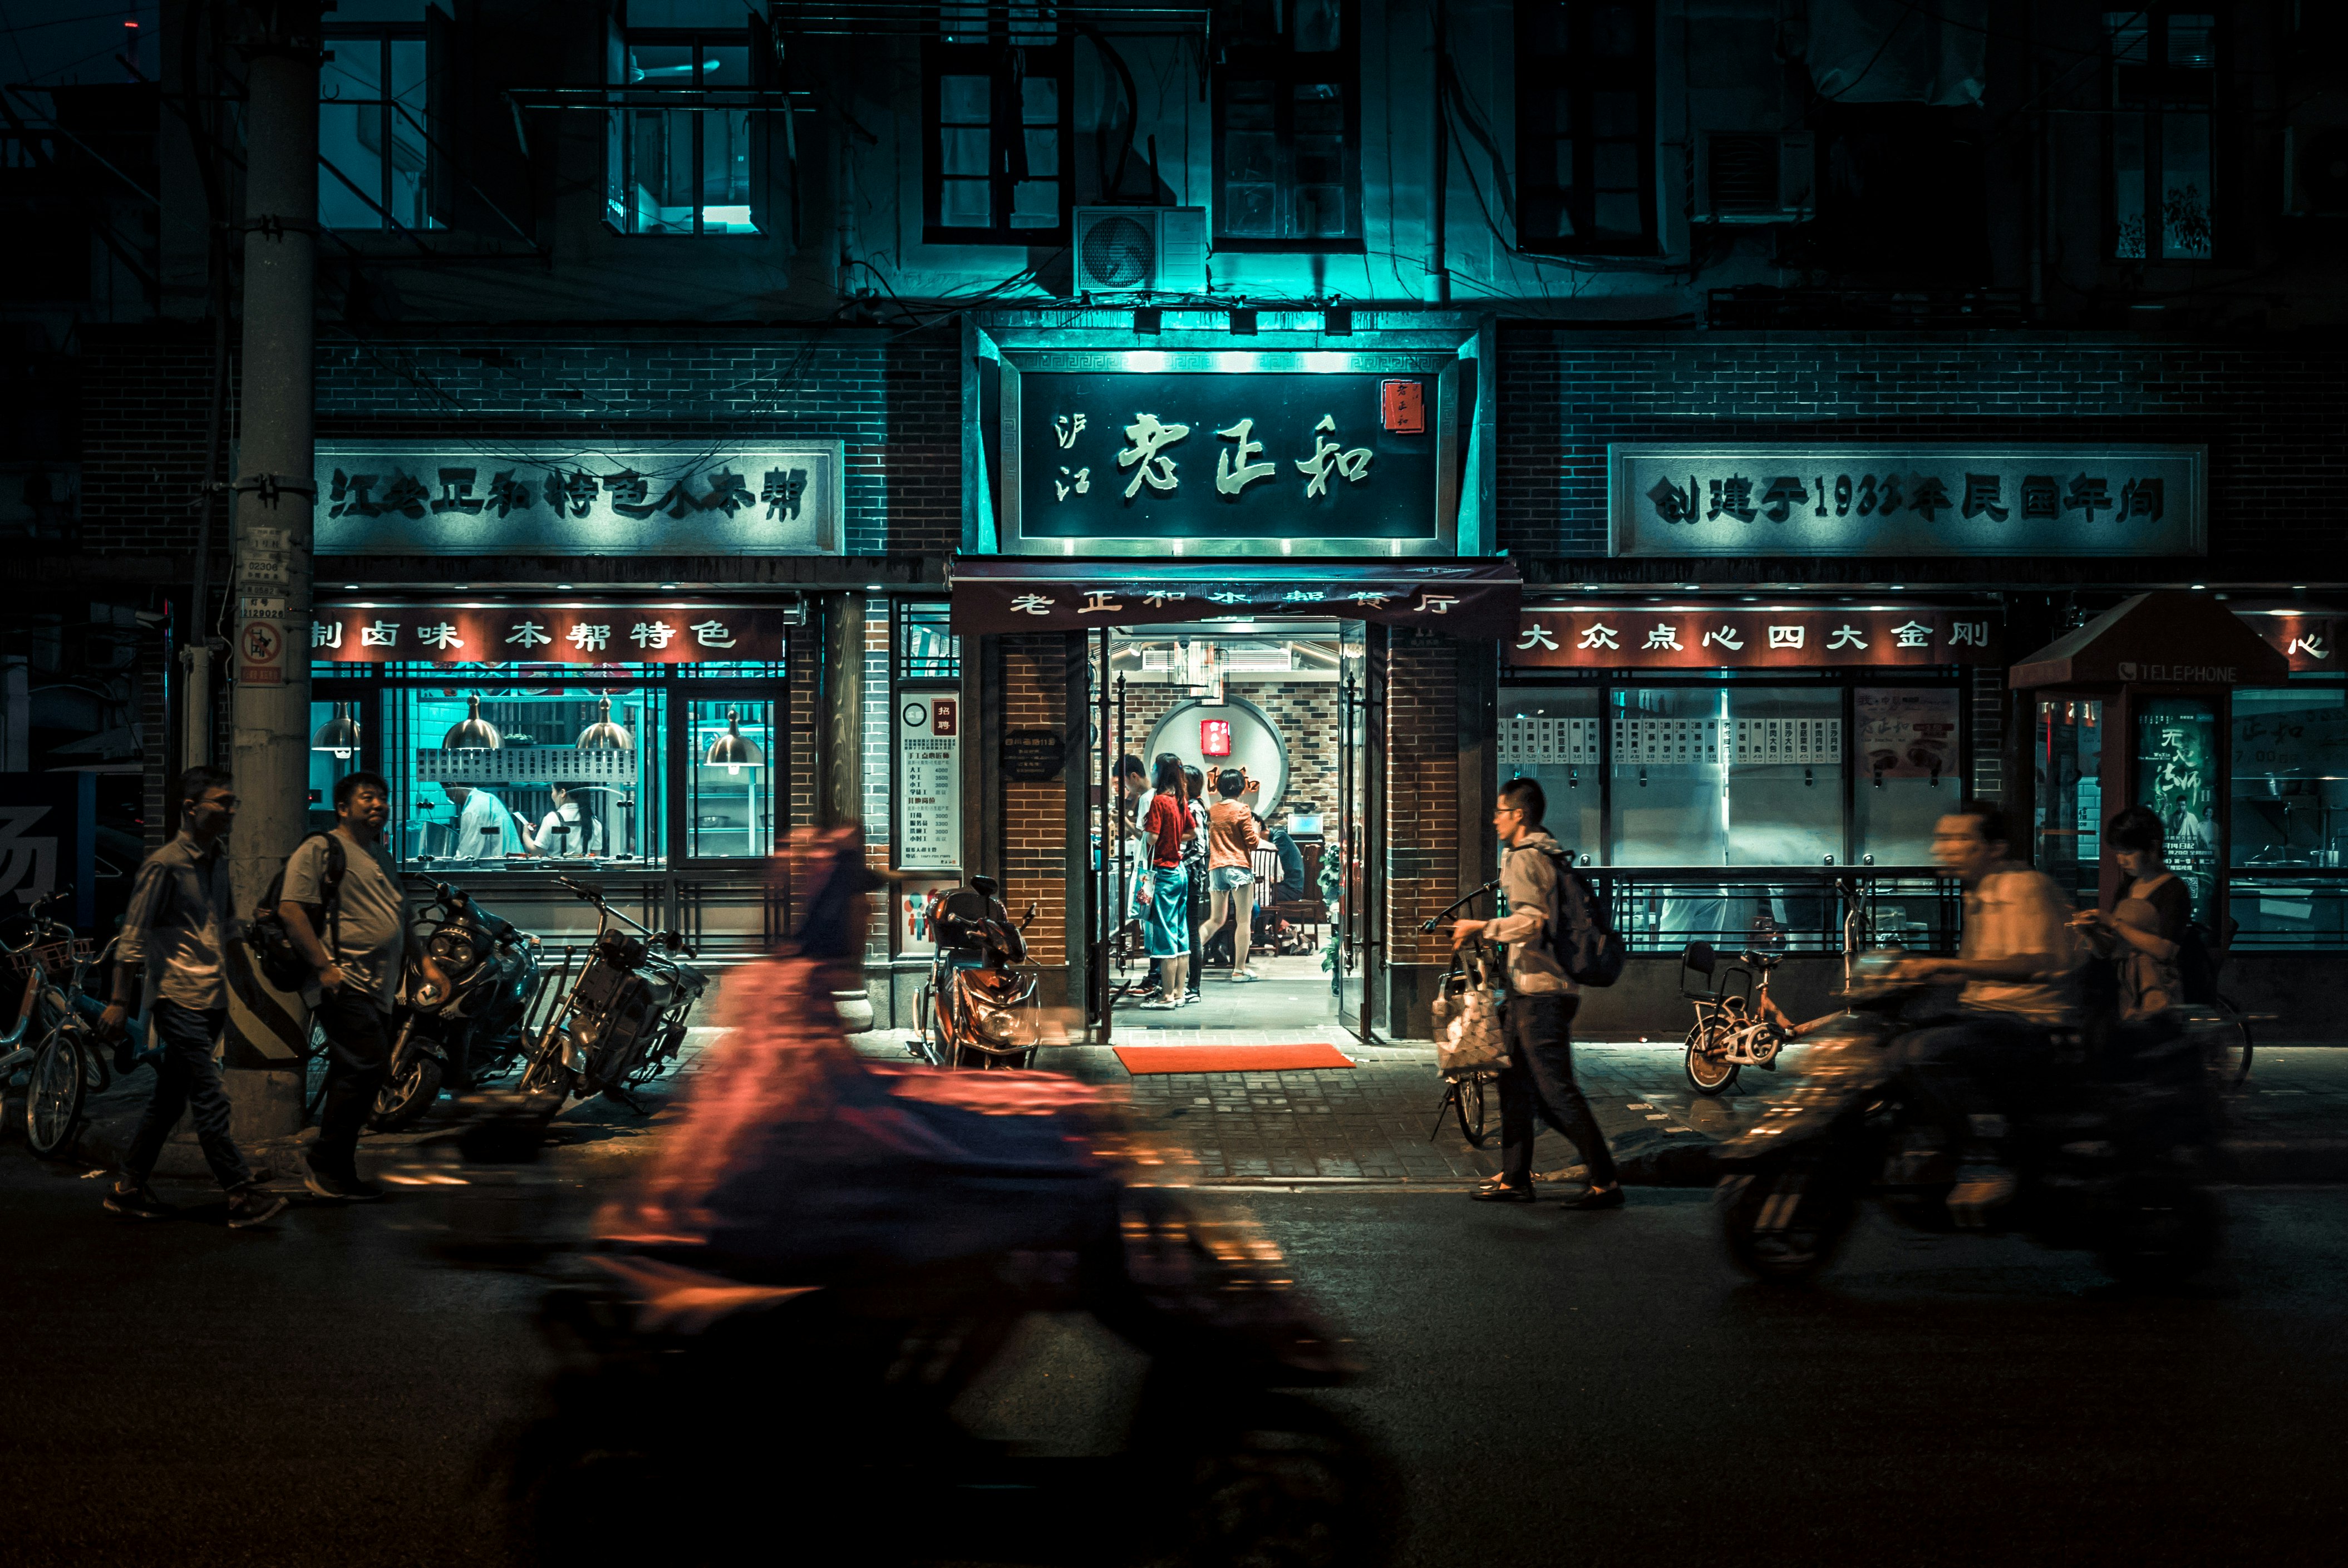 motorcycles and people passing by at night time